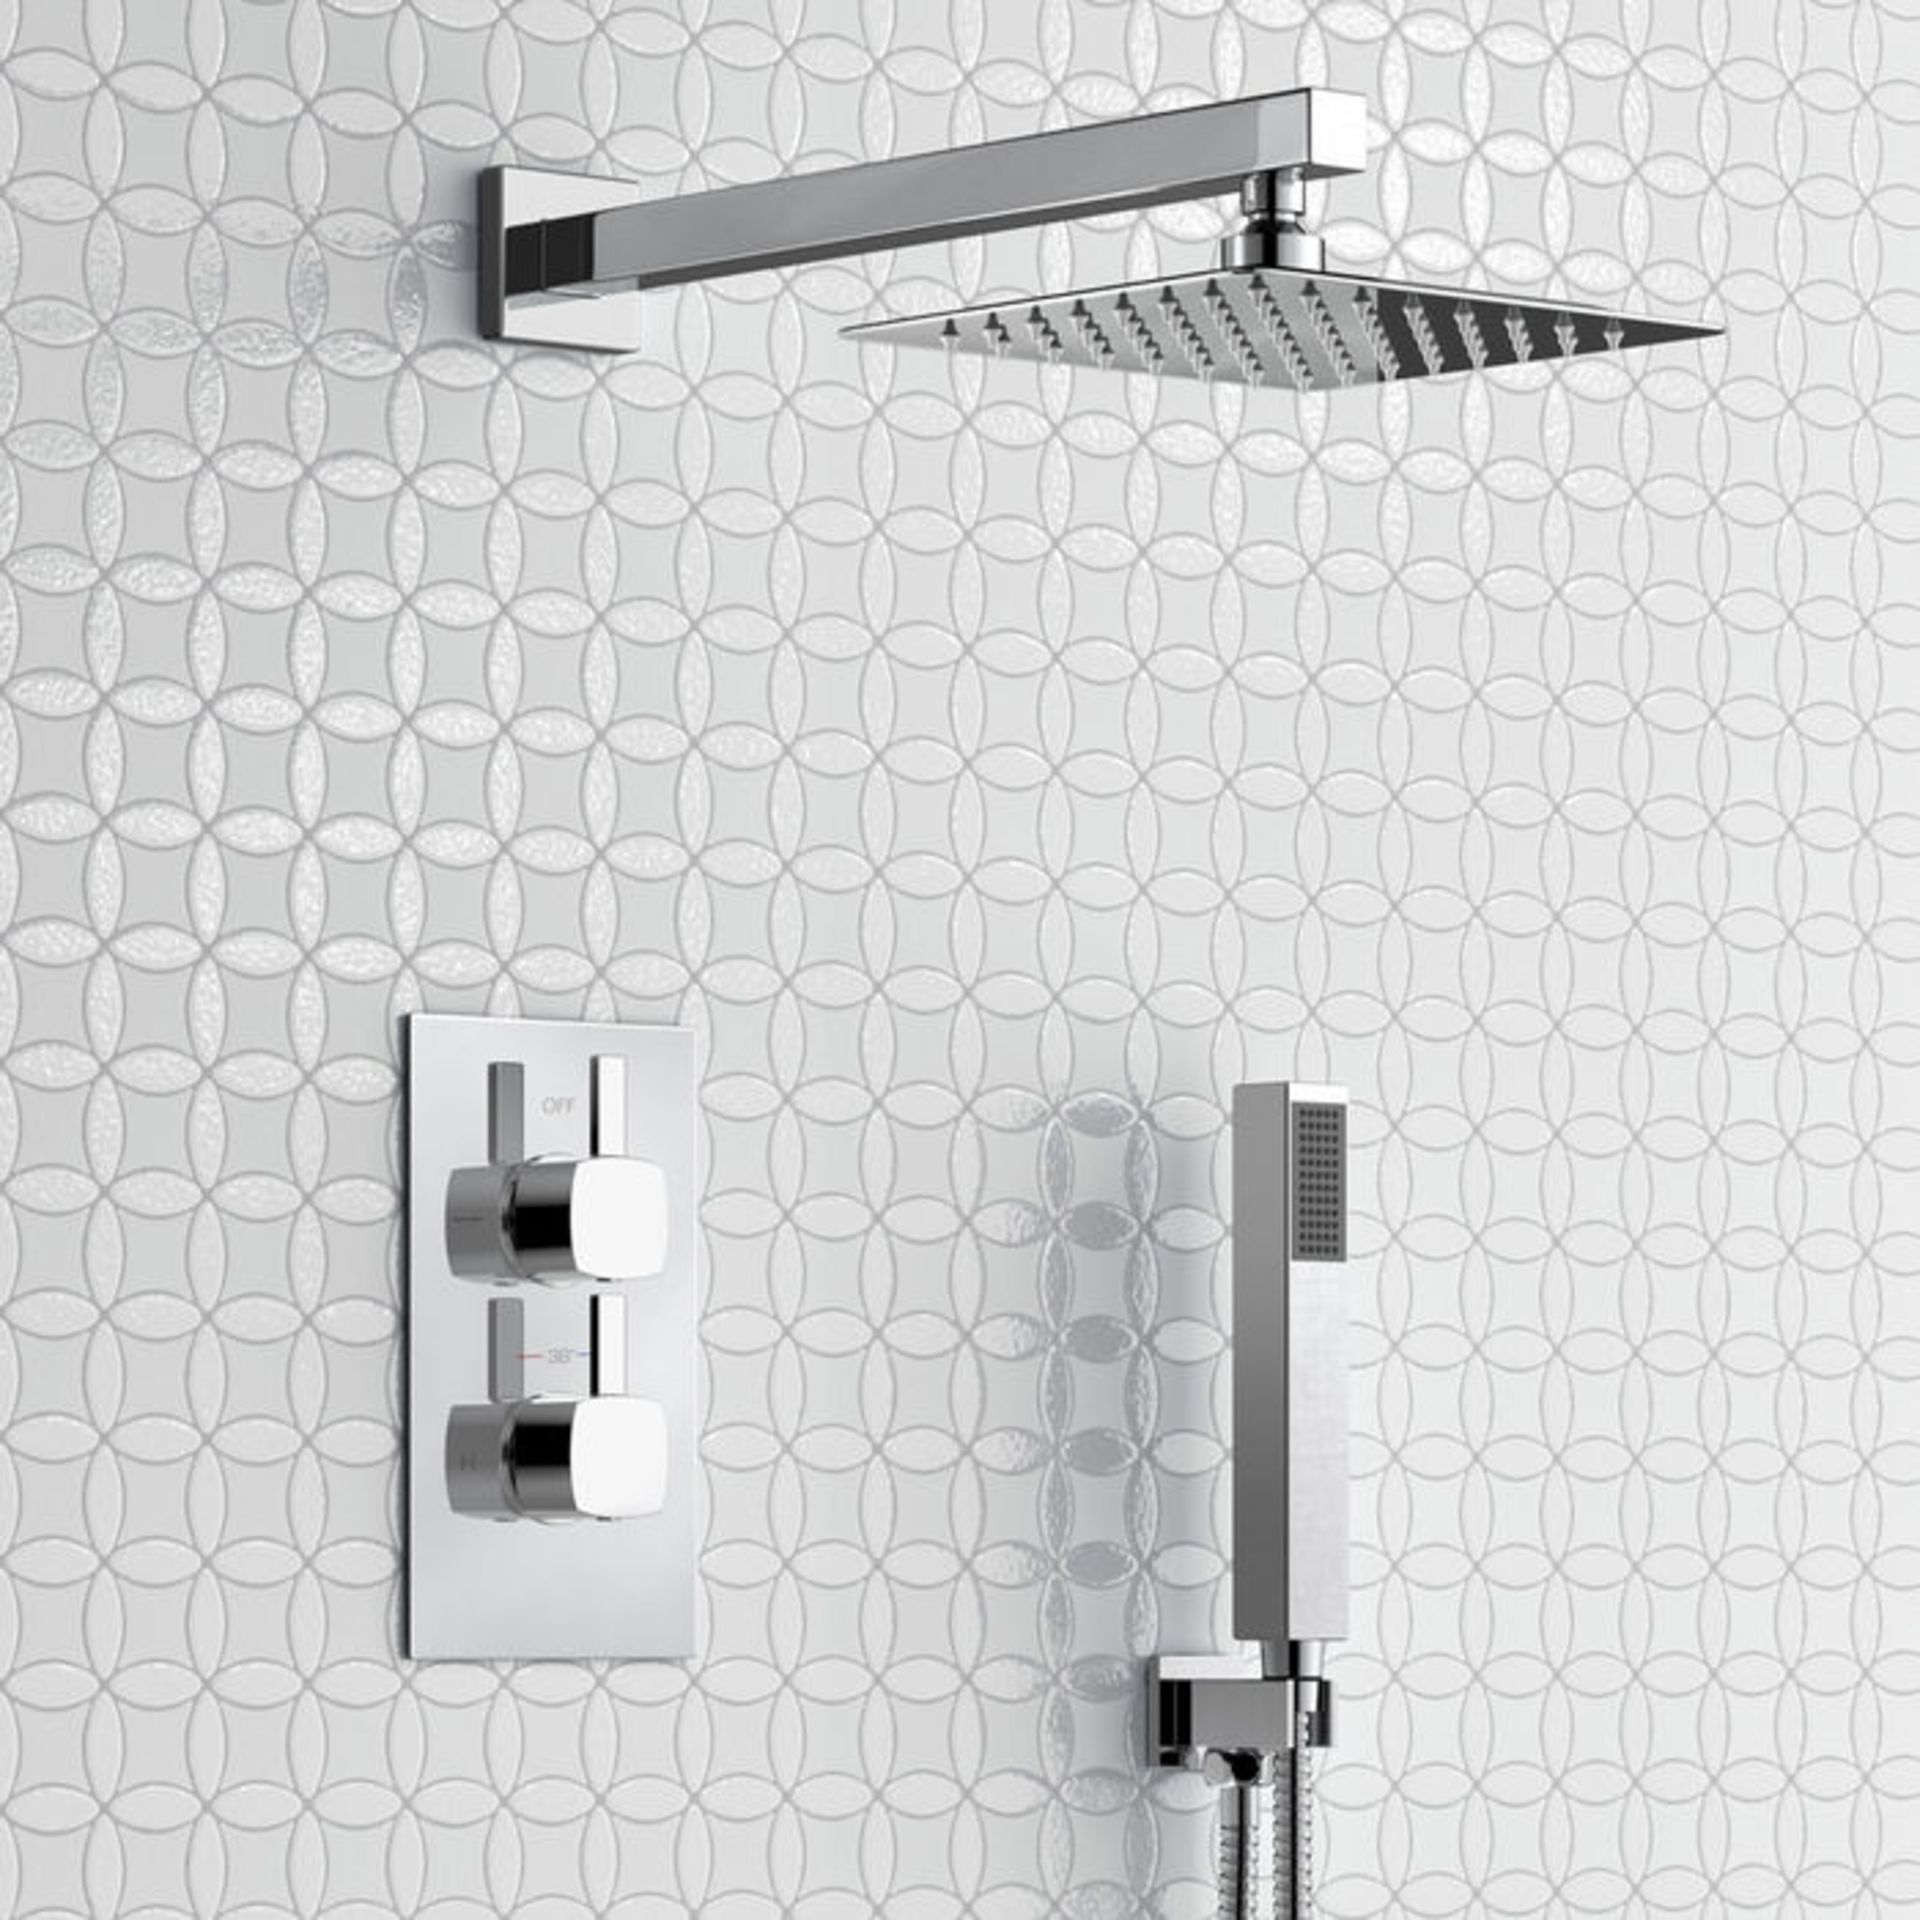 (A30) 200mm Square Stainless Steel Wall Mounted Head, Handheld & Thermostatic Mixer Shower Kit - - Image 2 of 3